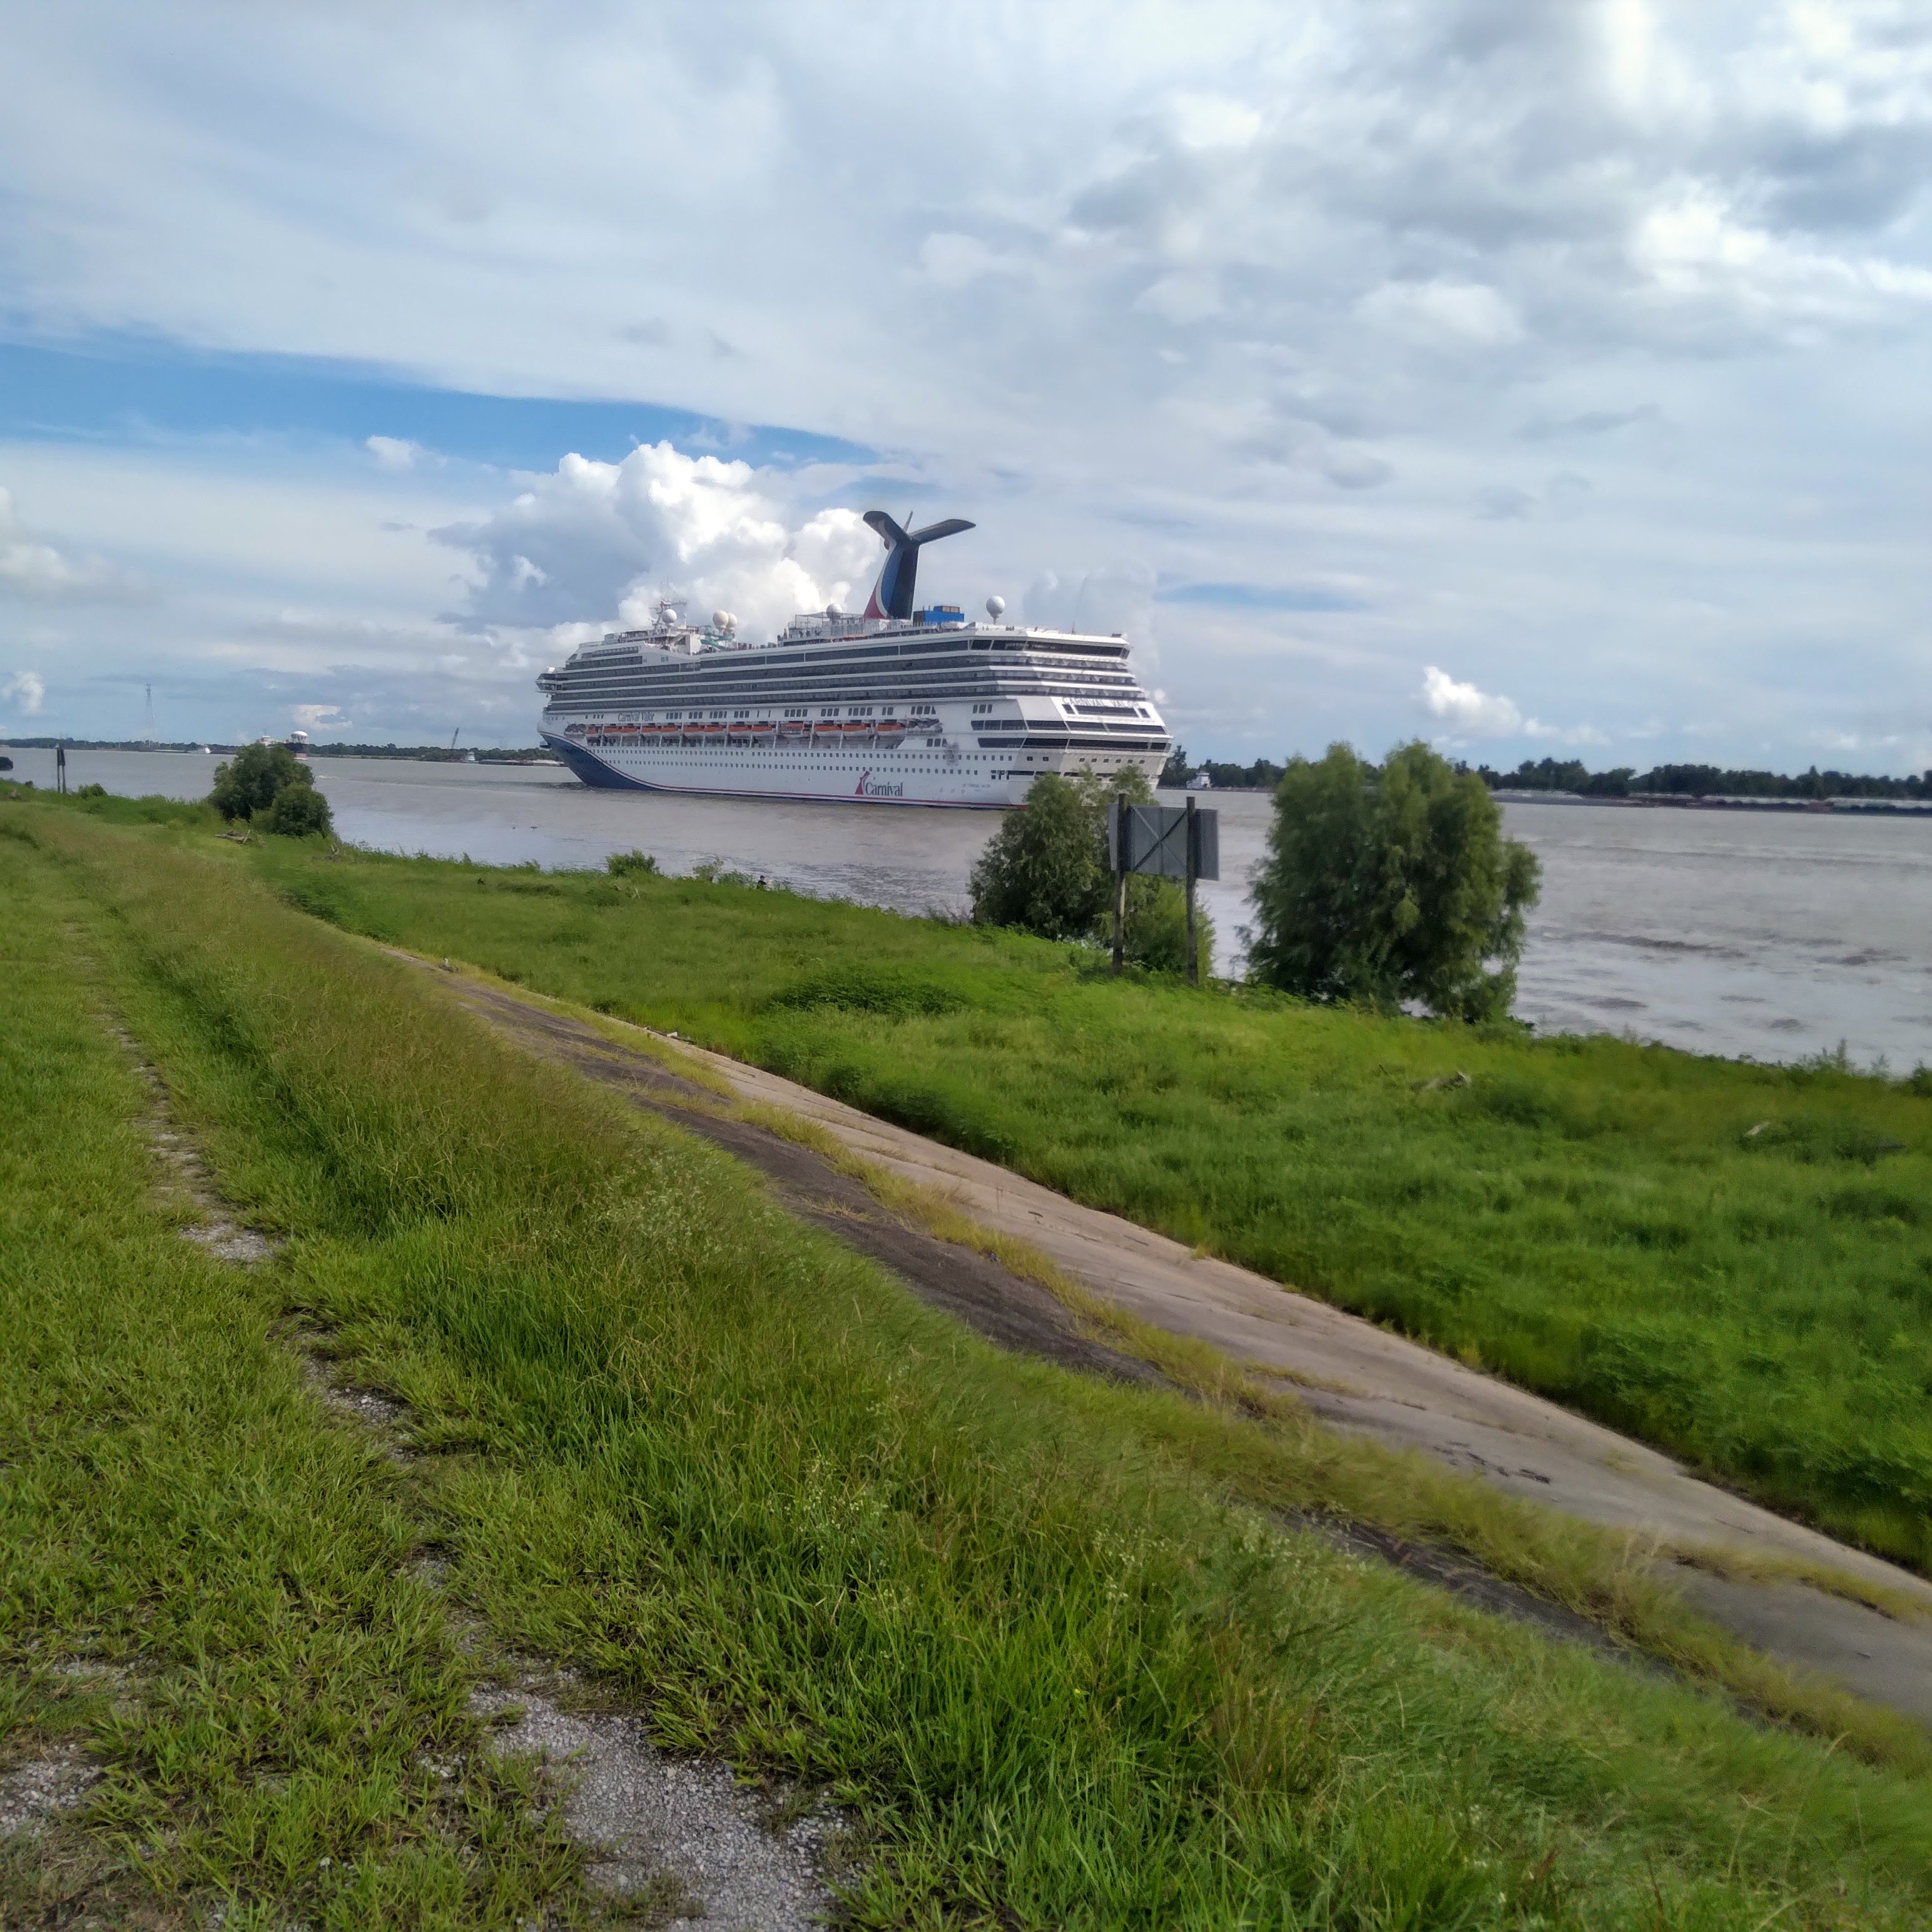 Carnival Valor on the levee